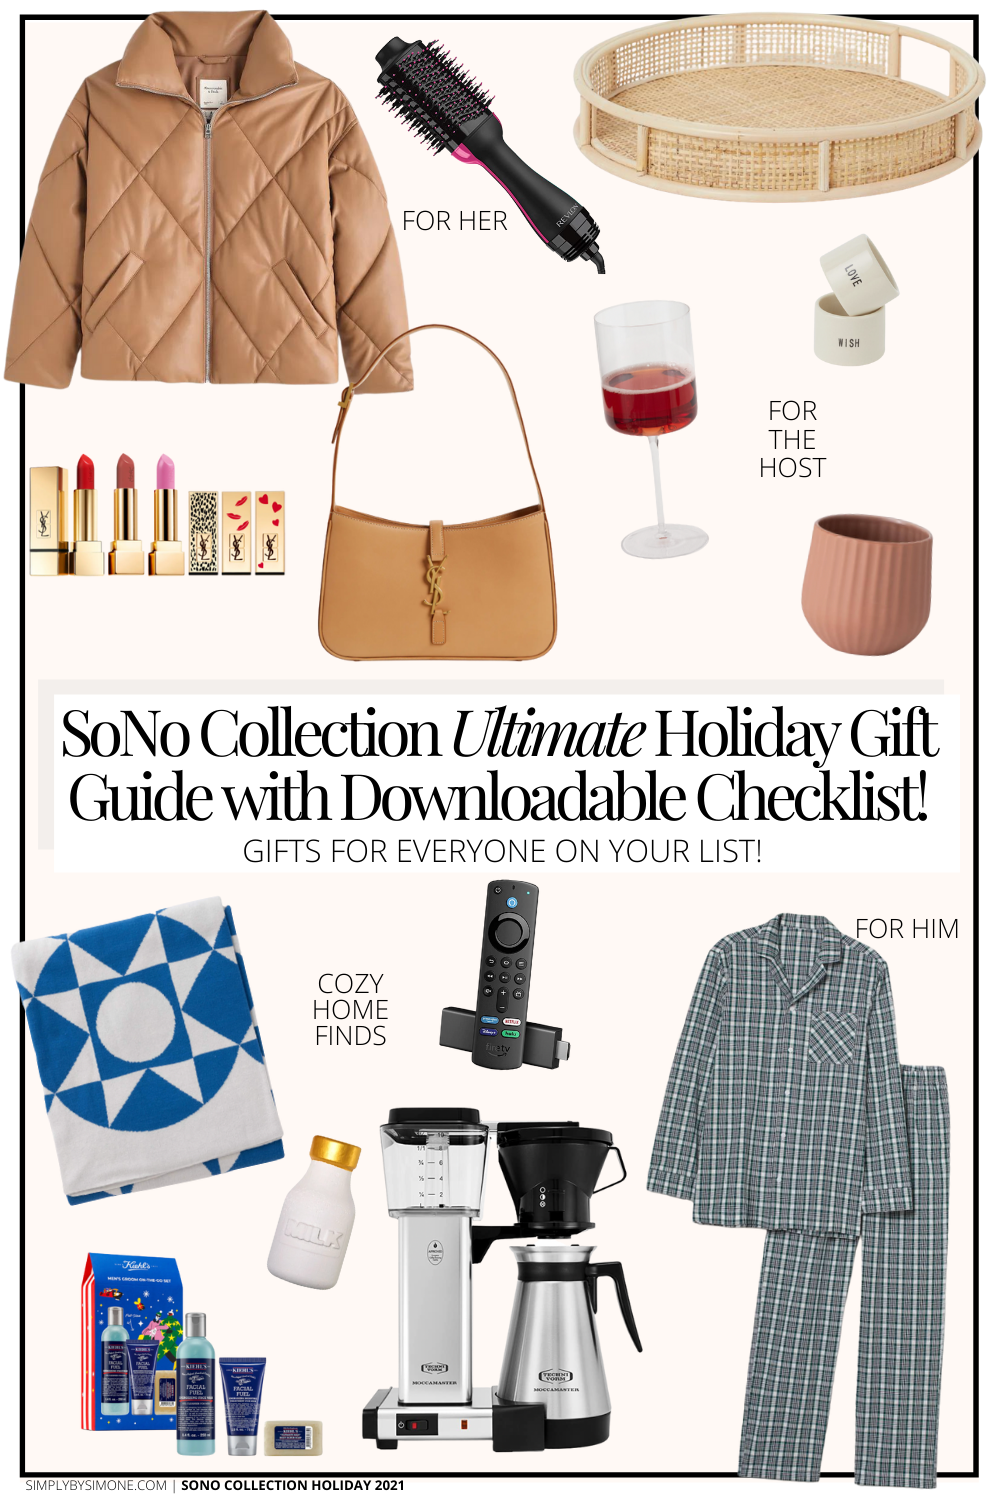 Holiday Gift Guide: Presents For Everyone On Your List!